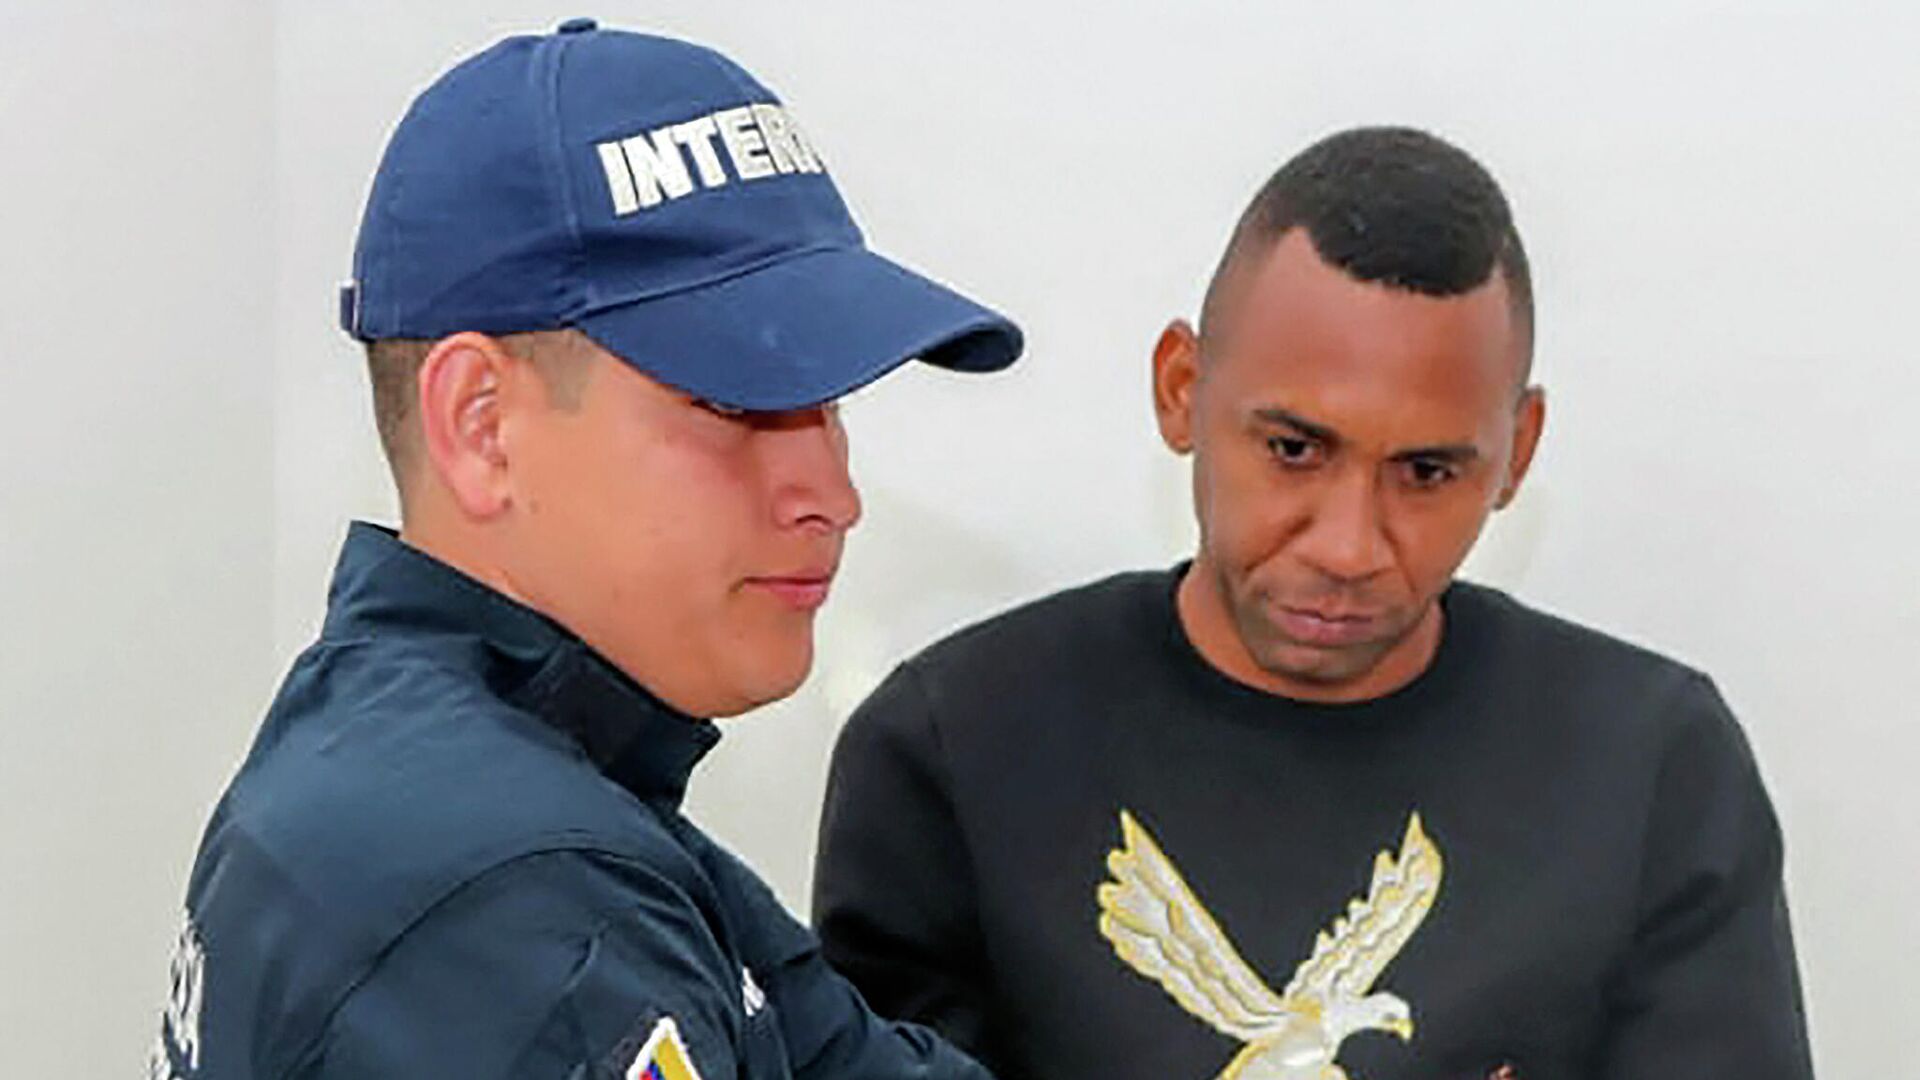 Handout picture released by the Colombian Police showing Colombia's former national football team player Jhon Viafara handcuffed before his extradition to the United States, in Bogota, on January 23, 2020. - Colombian former national football team player Jhon Viafara was extradited to the United States on January 23, 2020, where he is required after being accused of drug trafficking. Viafara has charges for manufacture and distribution of cocaine to the United States. (Photo by HO / Colombian Police / AFP) / RESTRICTED TO EDITORIAL USE - MANDATORY CREDIT AFP PHOTO / COLOMBIAN POLICE - NO MARKETING NO ADVERTISING CAMPAIGNS - DISTRIBUTED AS A SERVICE TO CLIENTS - РИА Новости, 1920, 02.04.2021